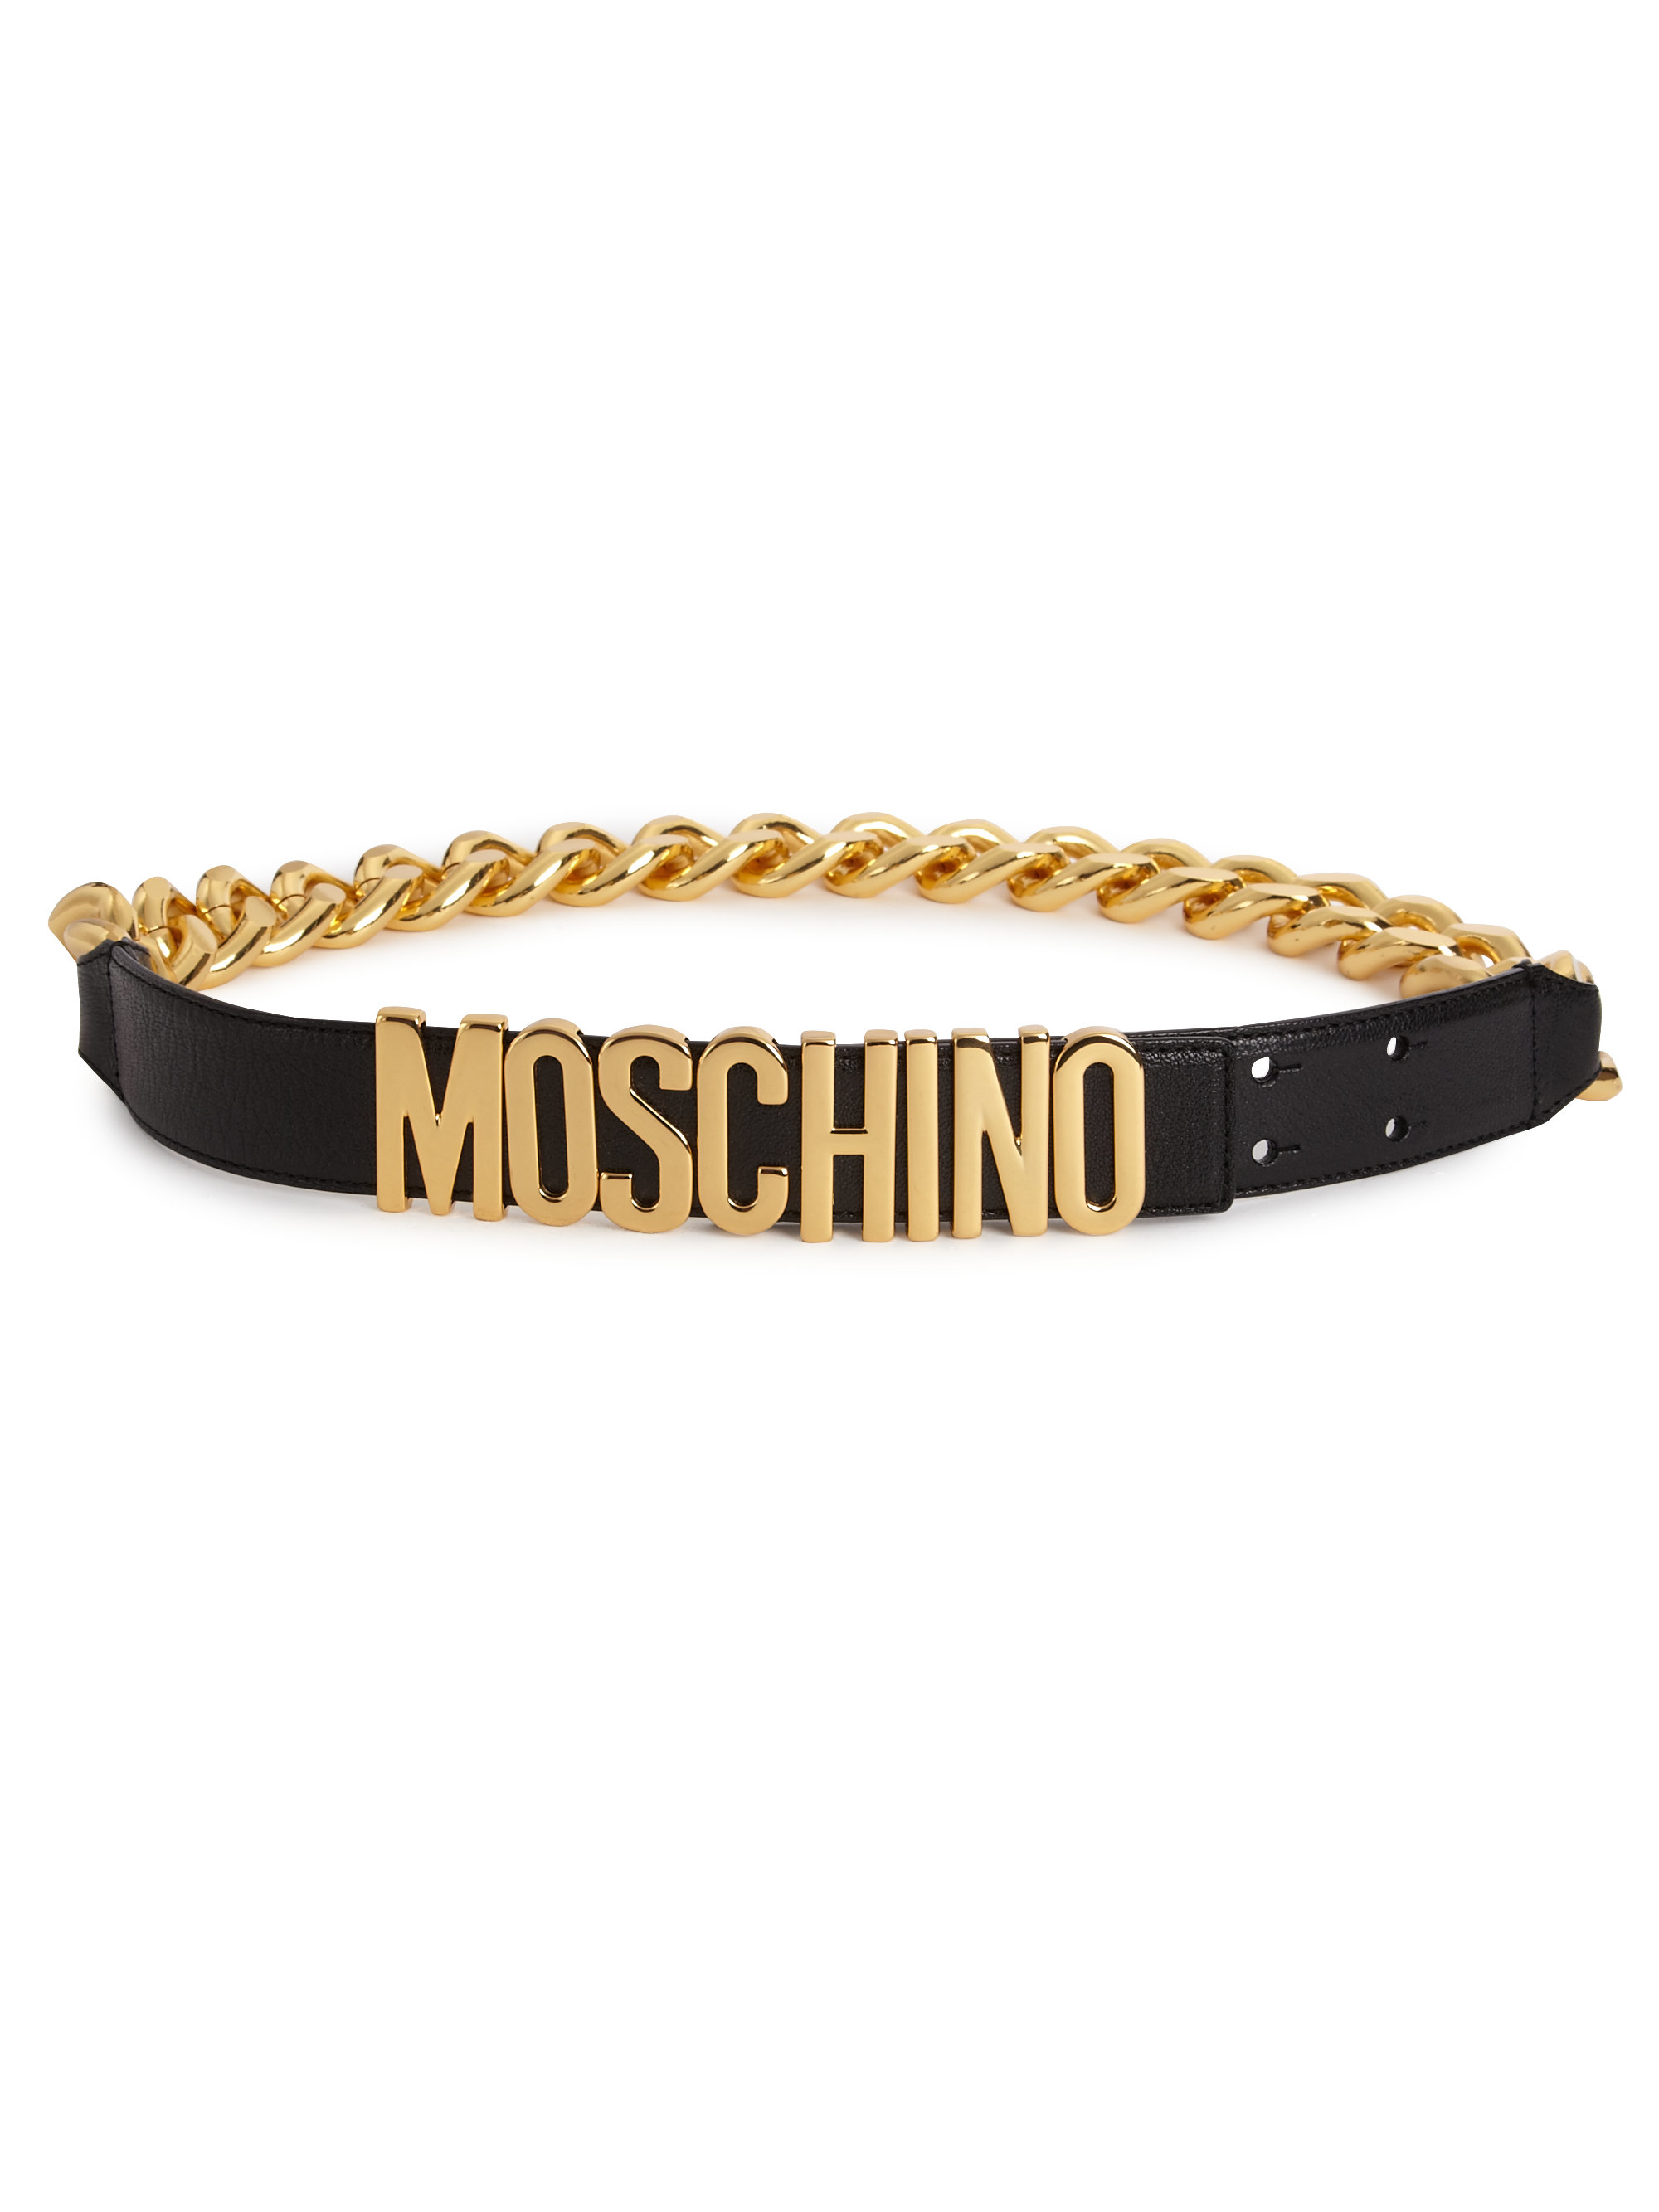 Moschino Synthetic Logo Chain Belt in Black - Lyst